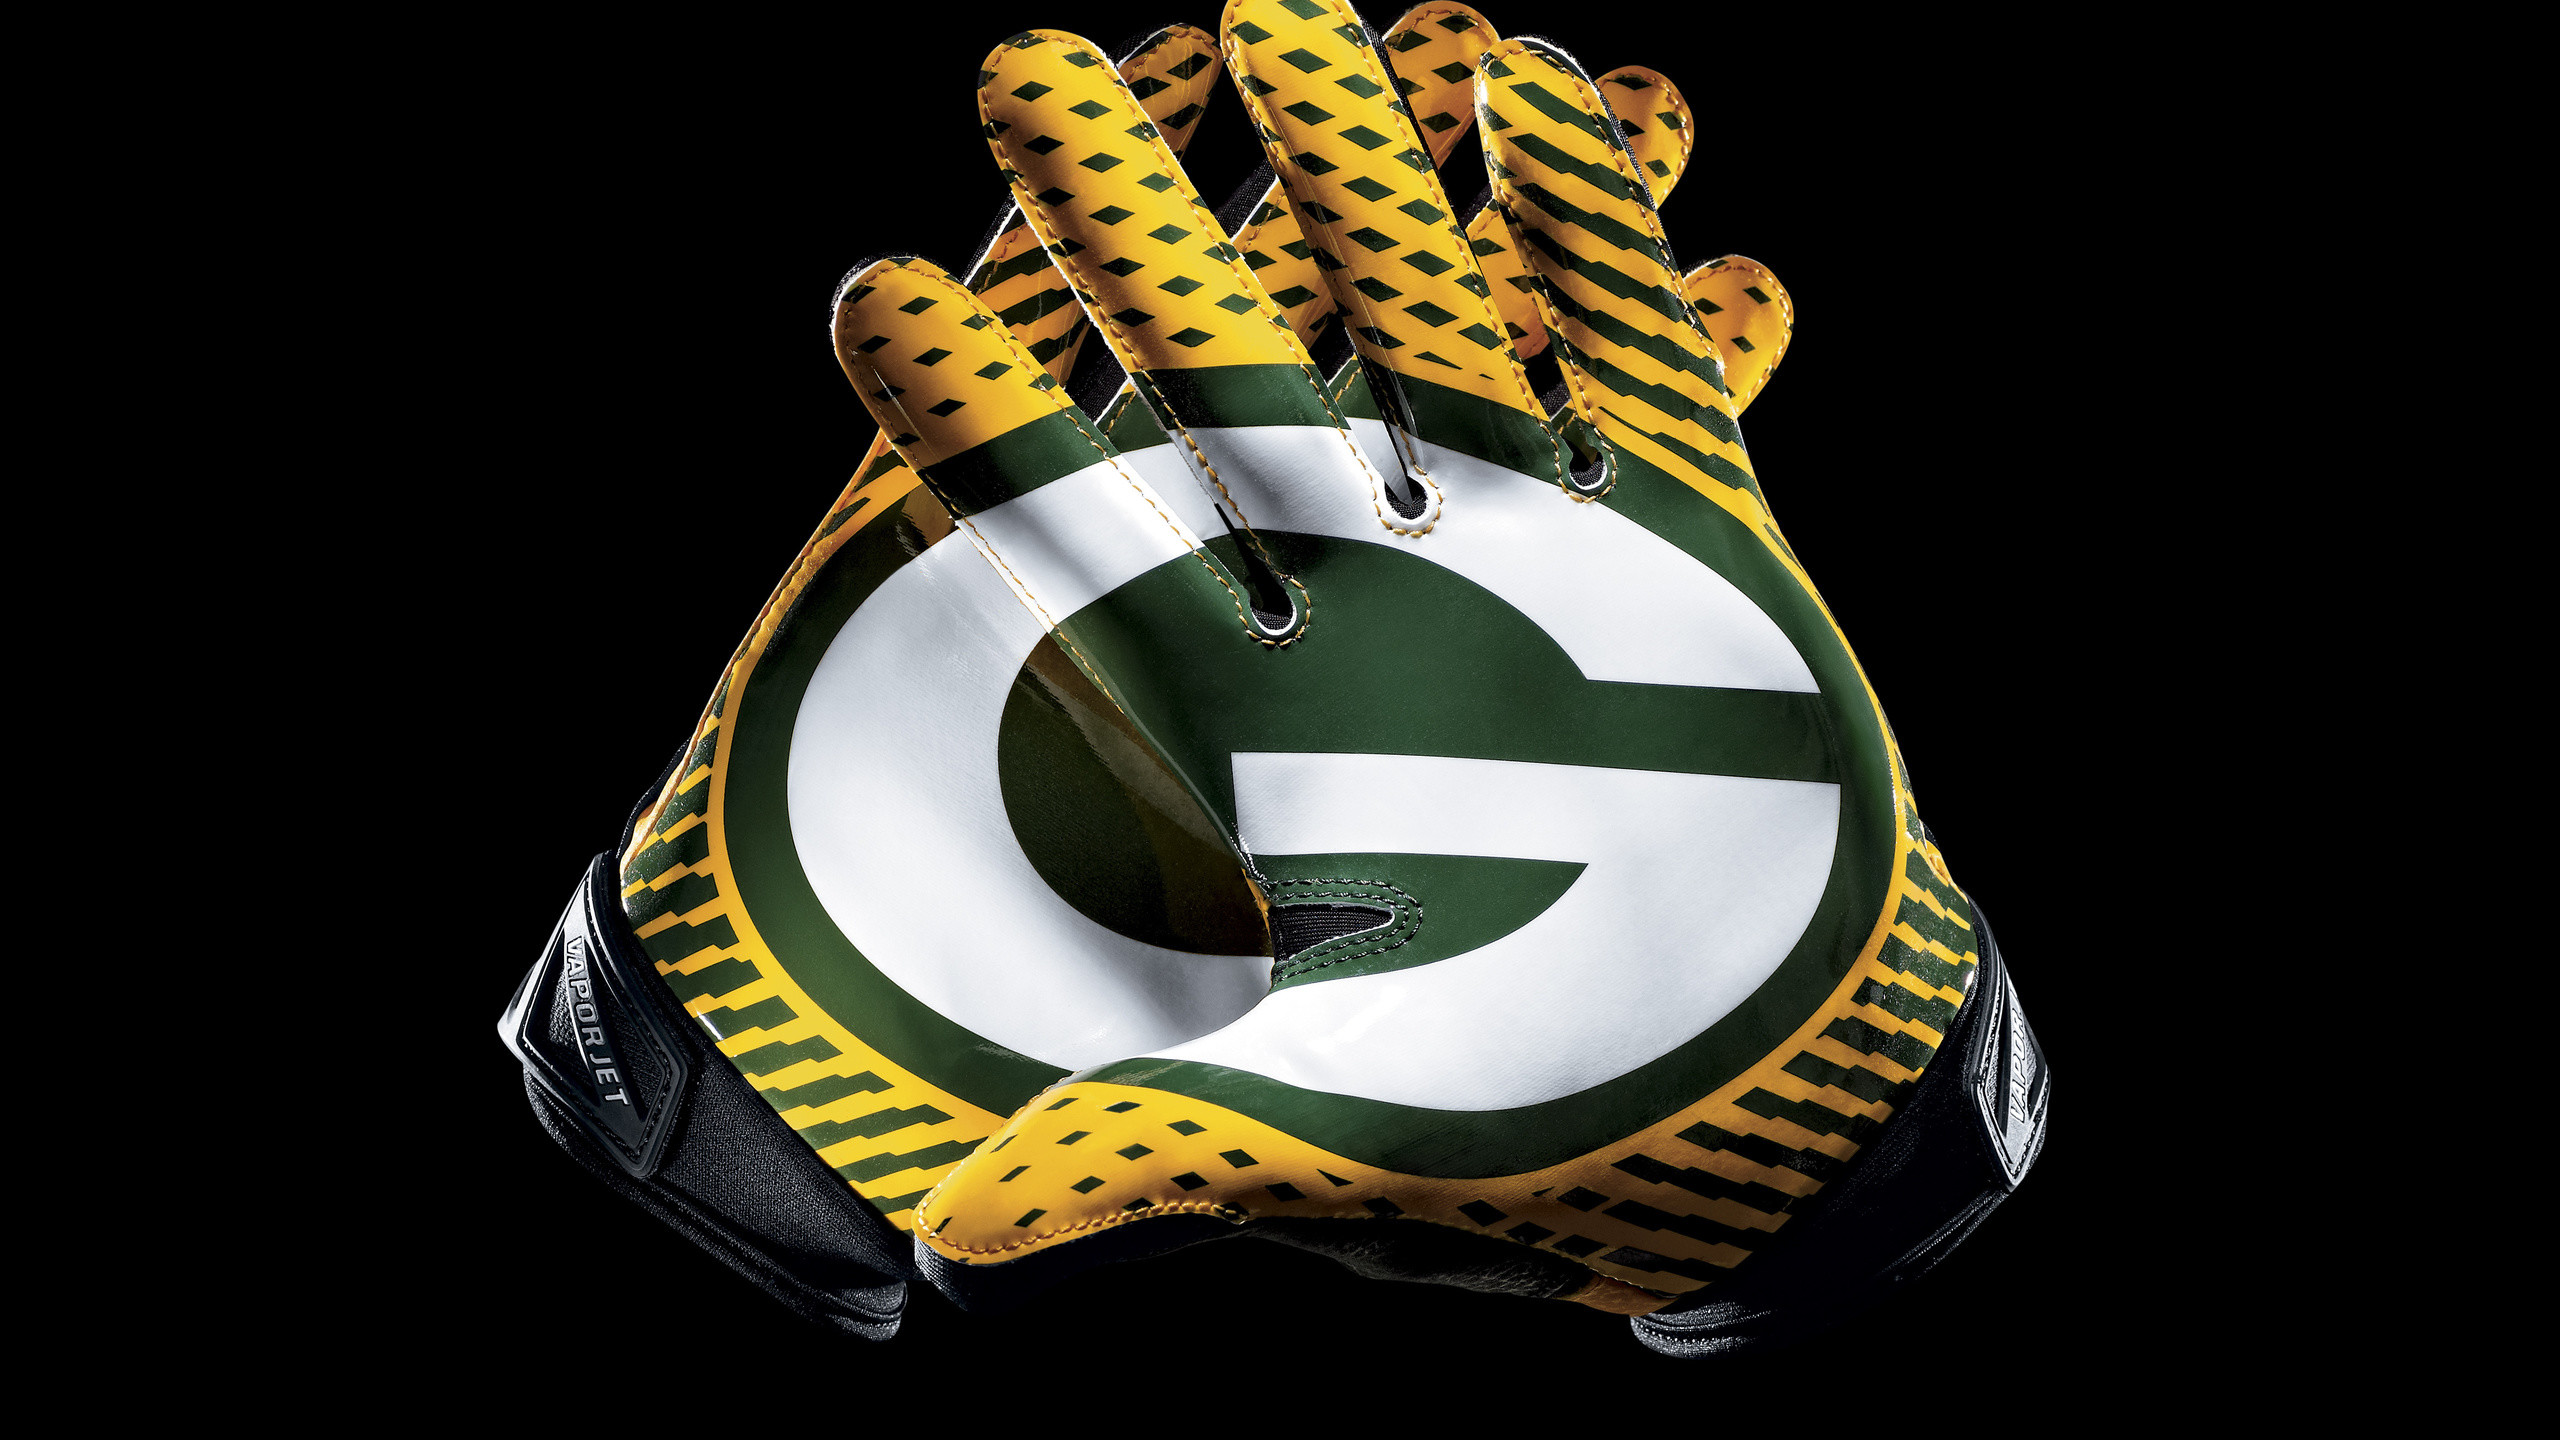 2560x1440 Green Bay Packers Nfl, Nfl, Sports, American Football, Green Bay Packers,